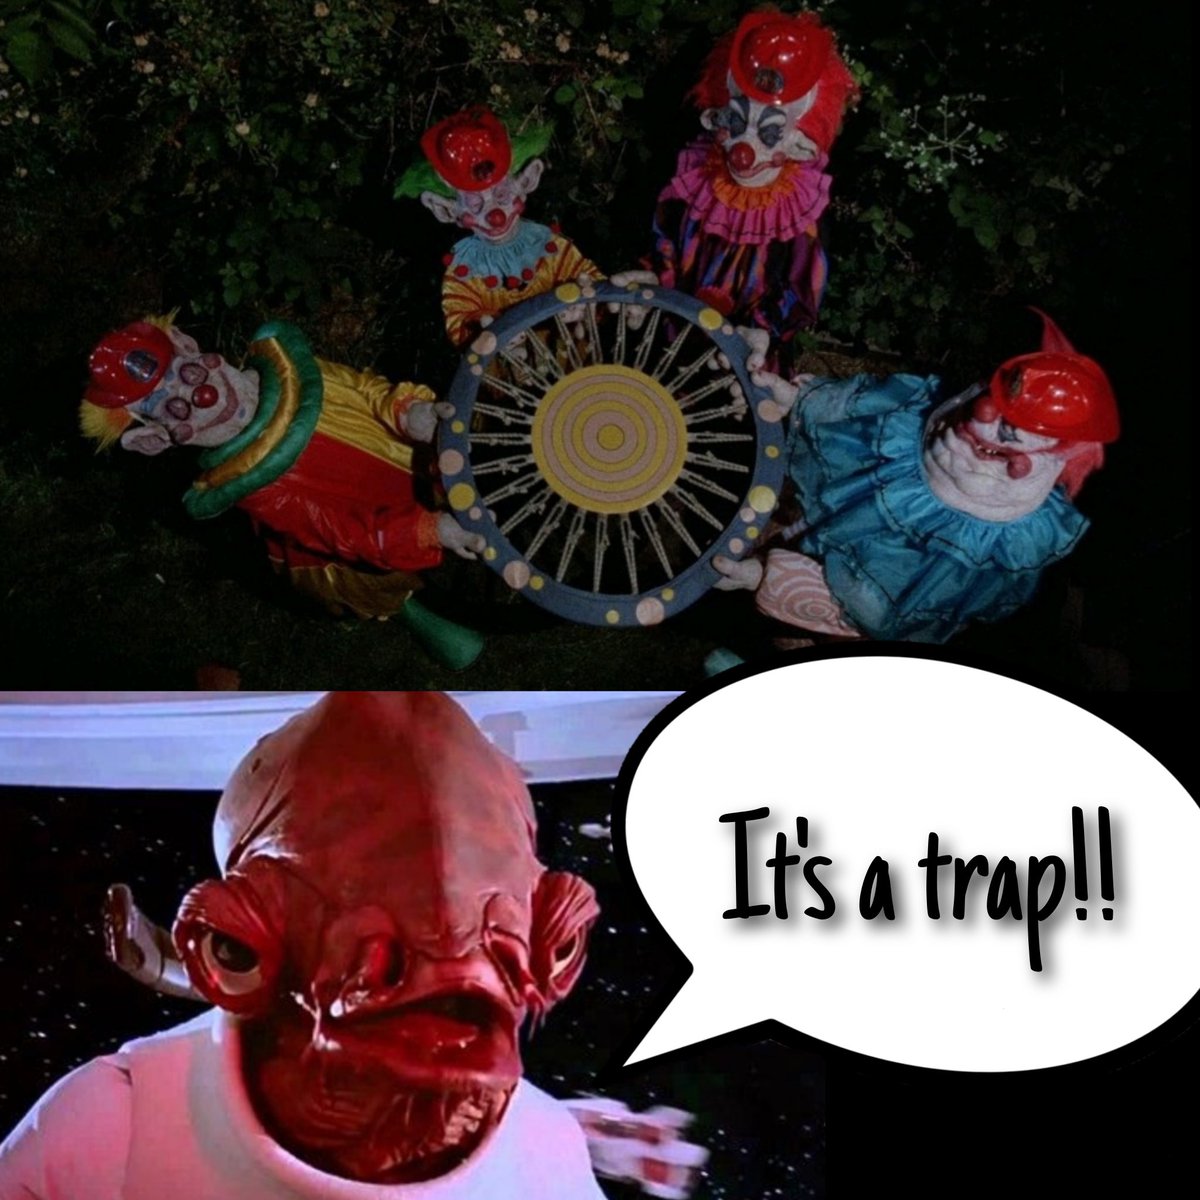 Friday, our #Halloween movies roll on as Aaron Knowles returns to co-host with the classic #KillerKlownsFromOuterSpace. Join us then!

#GrantCramer #SuzanneSnyder  #JohnAllenNelson #JohnVernon #MichaelSiegel #PeterLicassi #RoyalDano #ChristopherTitus #StarWars #AdmiralAckbar